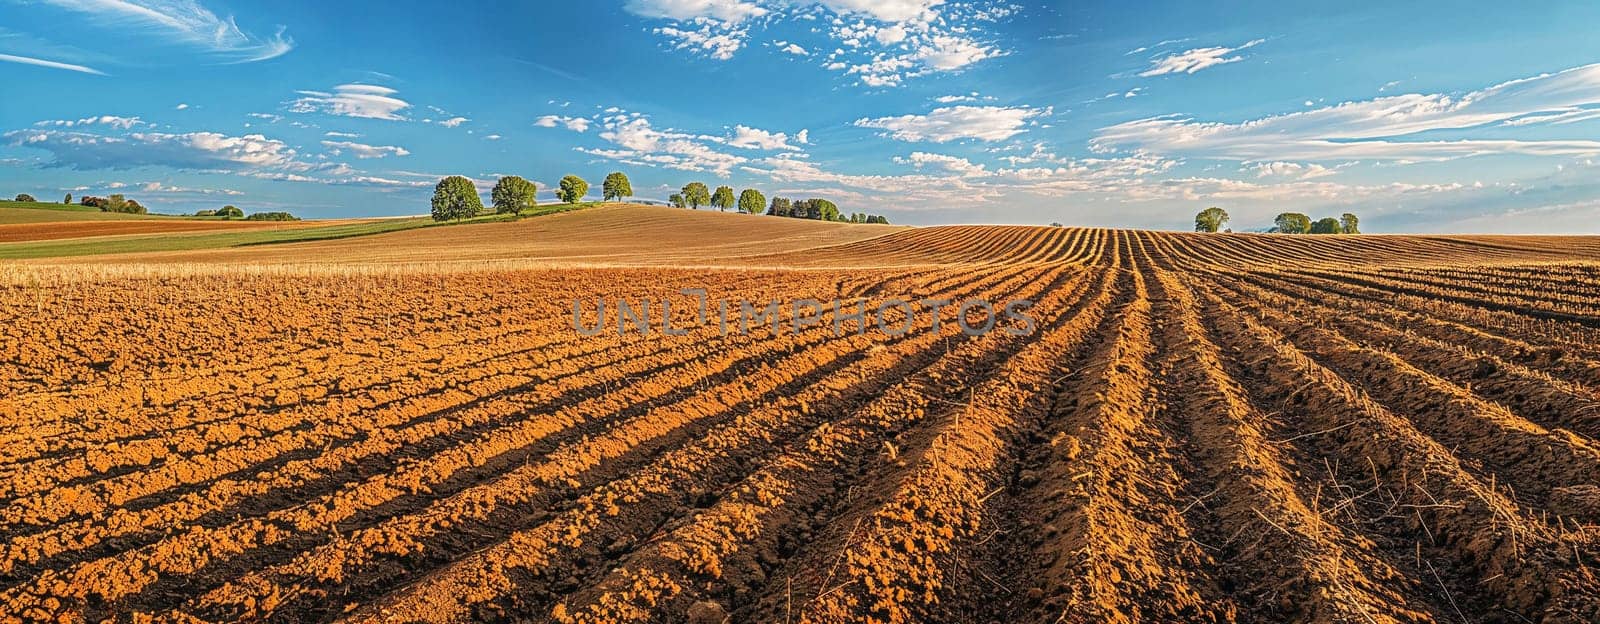 A plowed field under a clear blue sky with fluffy clouds, showcasing keyline plowing technique.